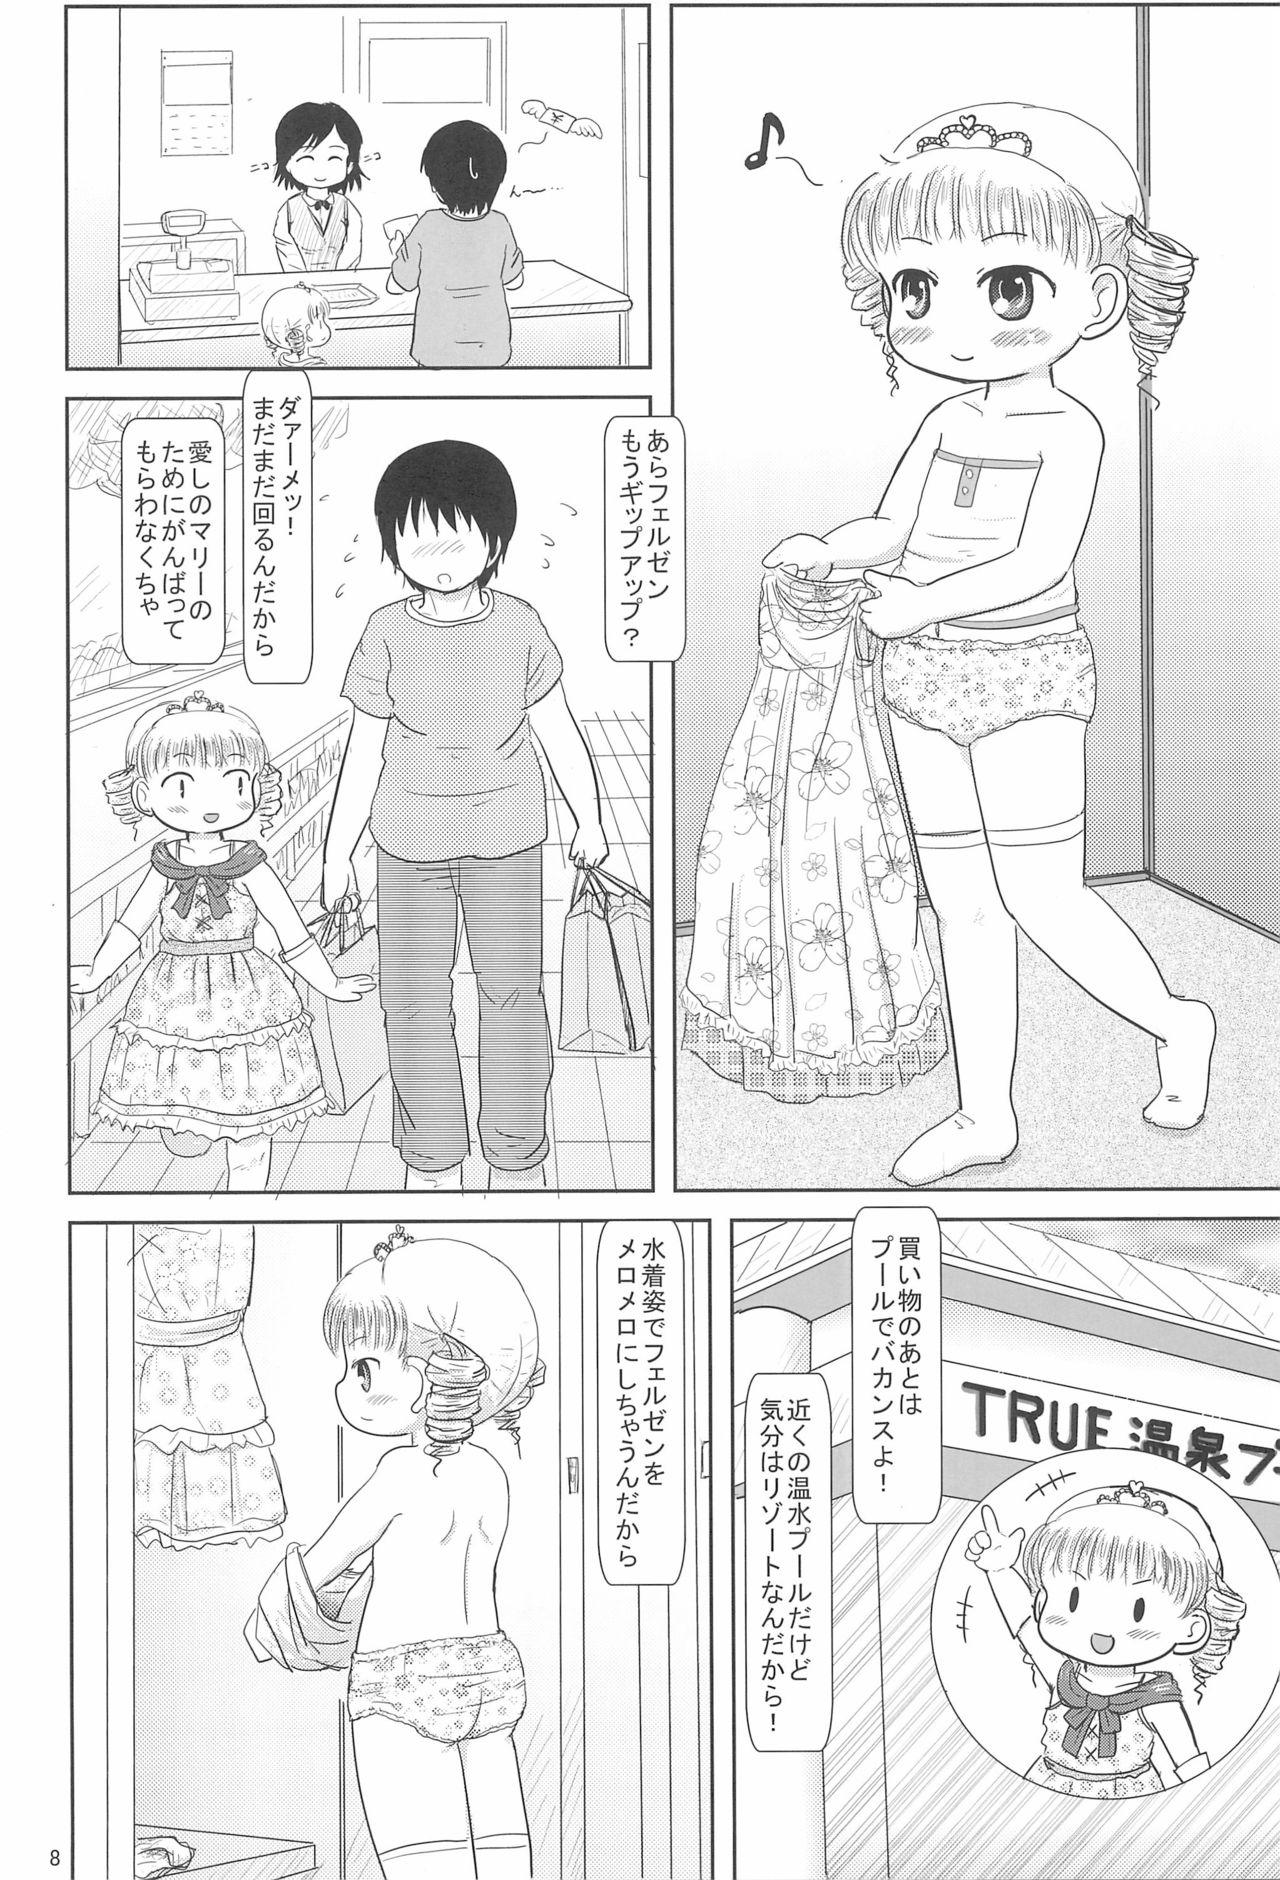 Gilf Marie to Issho ni - Baby princess Toy - Page 8